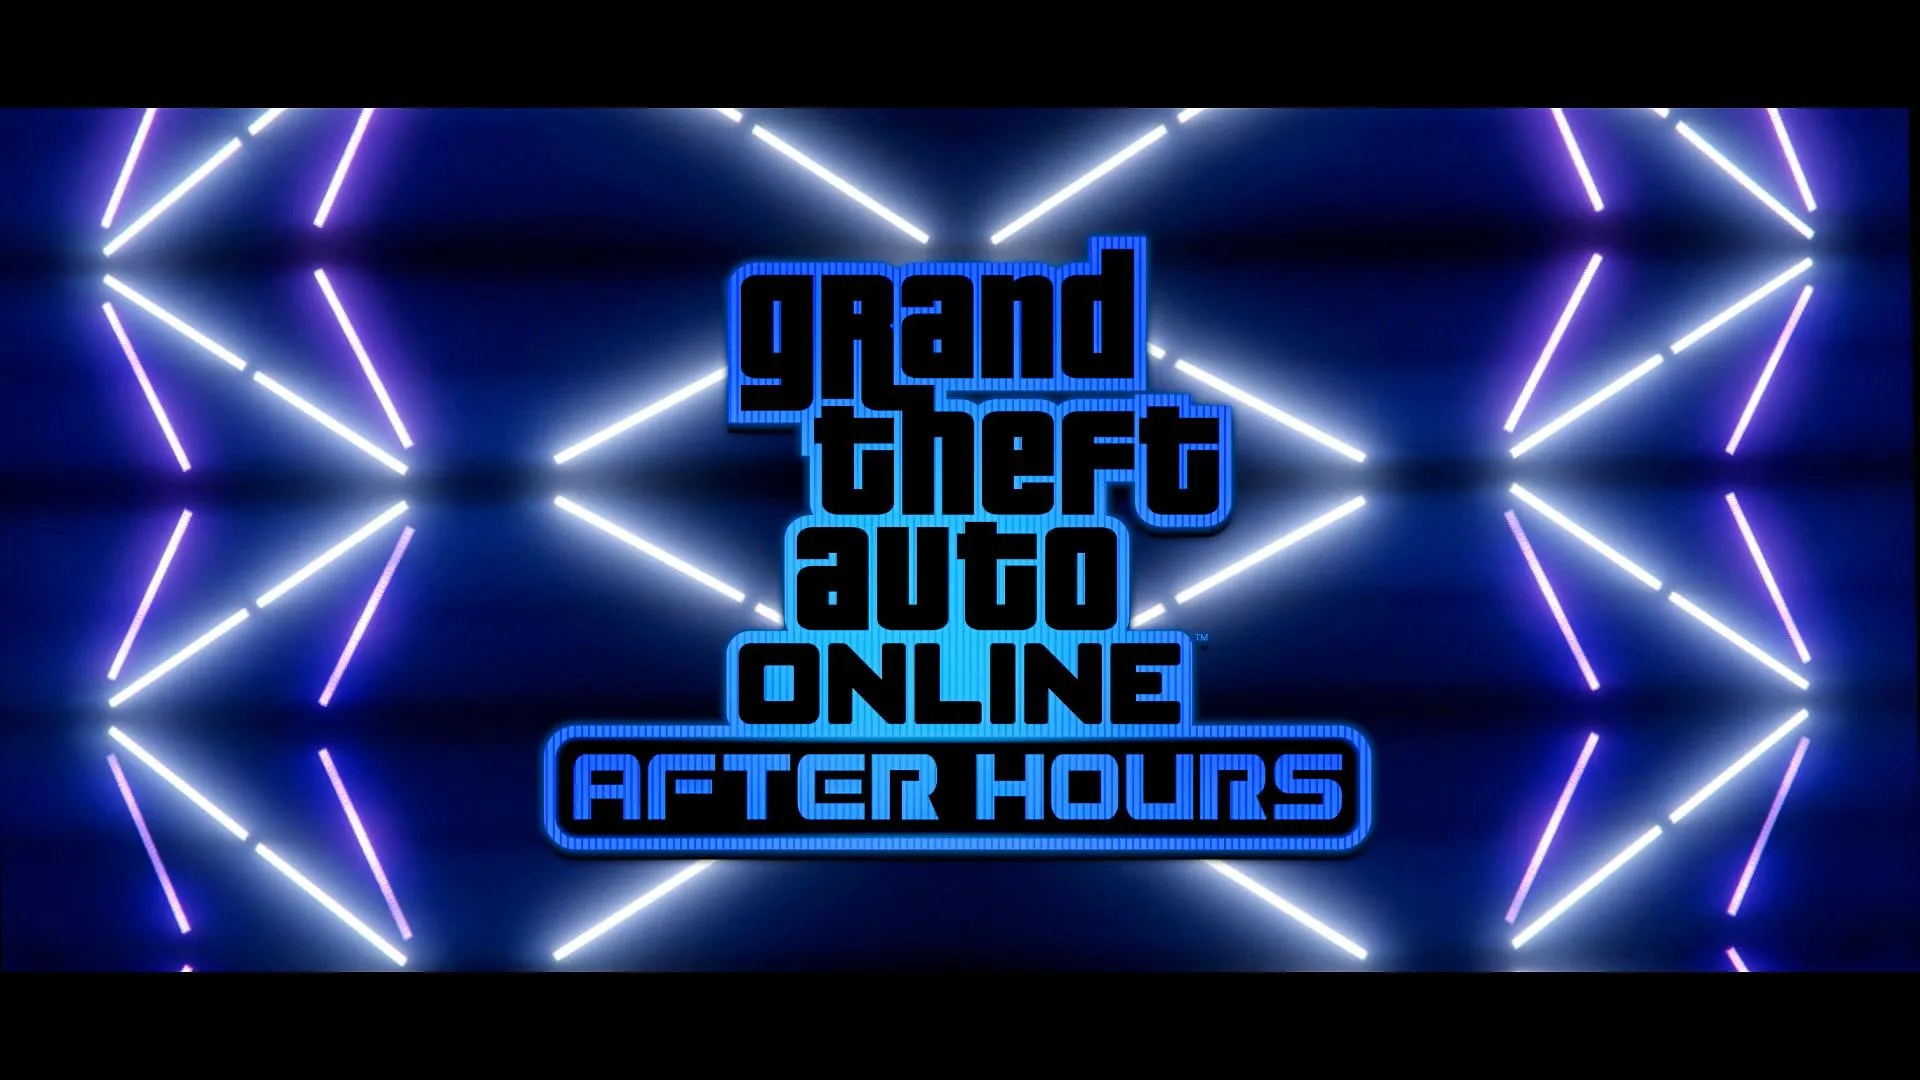 GTA Online After Hours resident Dixon taking over Beats1 